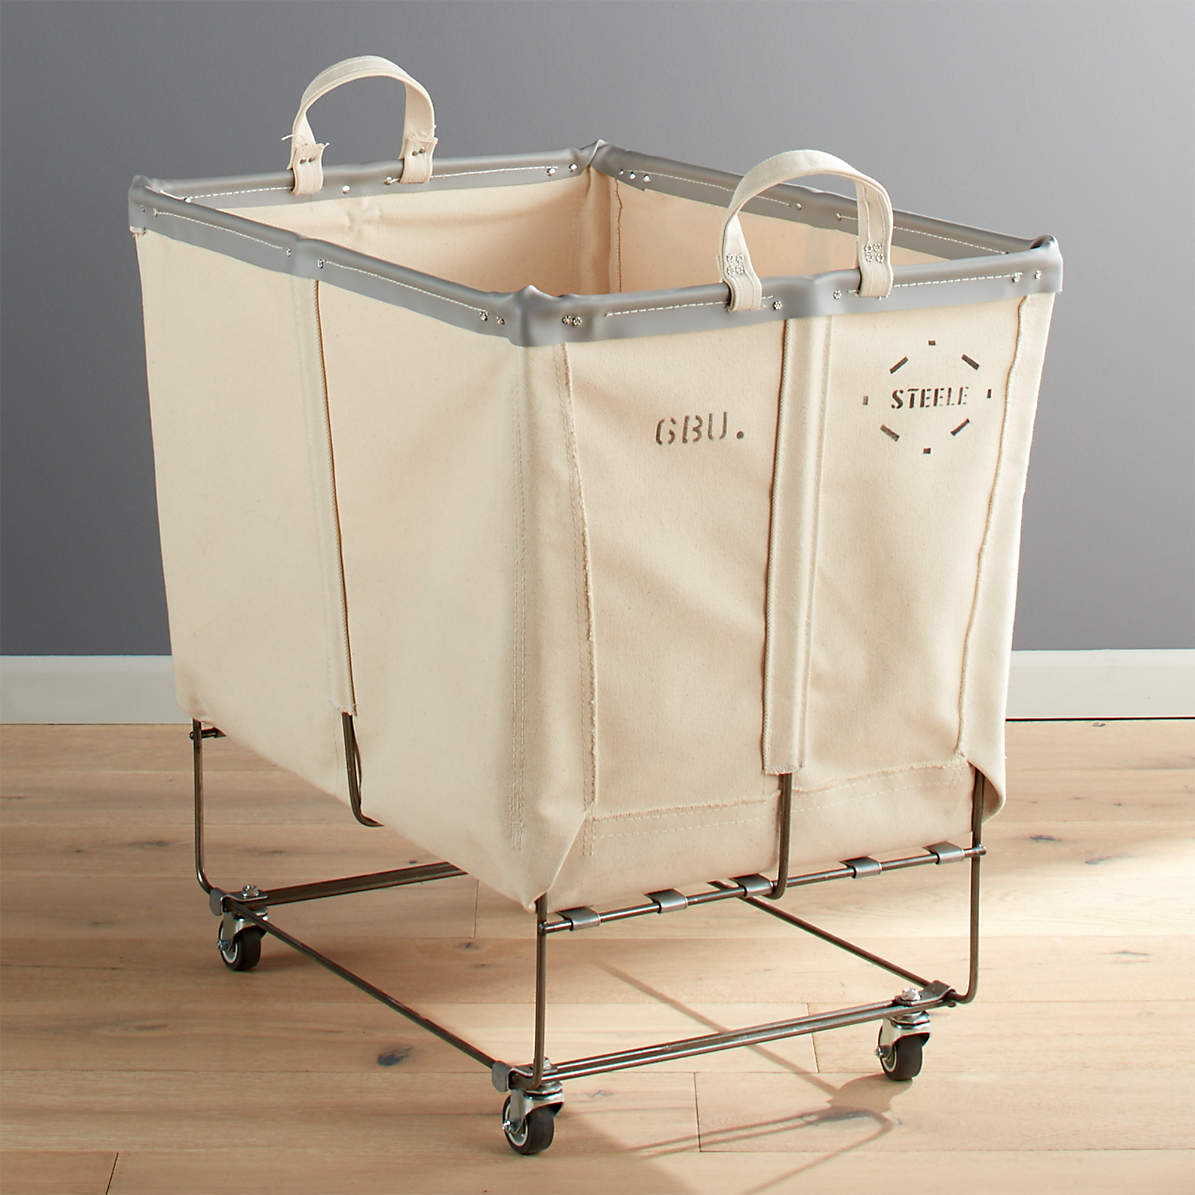 MYOYAY Laundry Sorter Cart with Wheels Collapsible Laundry Hamper Basket Trolley Foldable Commercial Rolling Laundry Cart with Steel Frame and